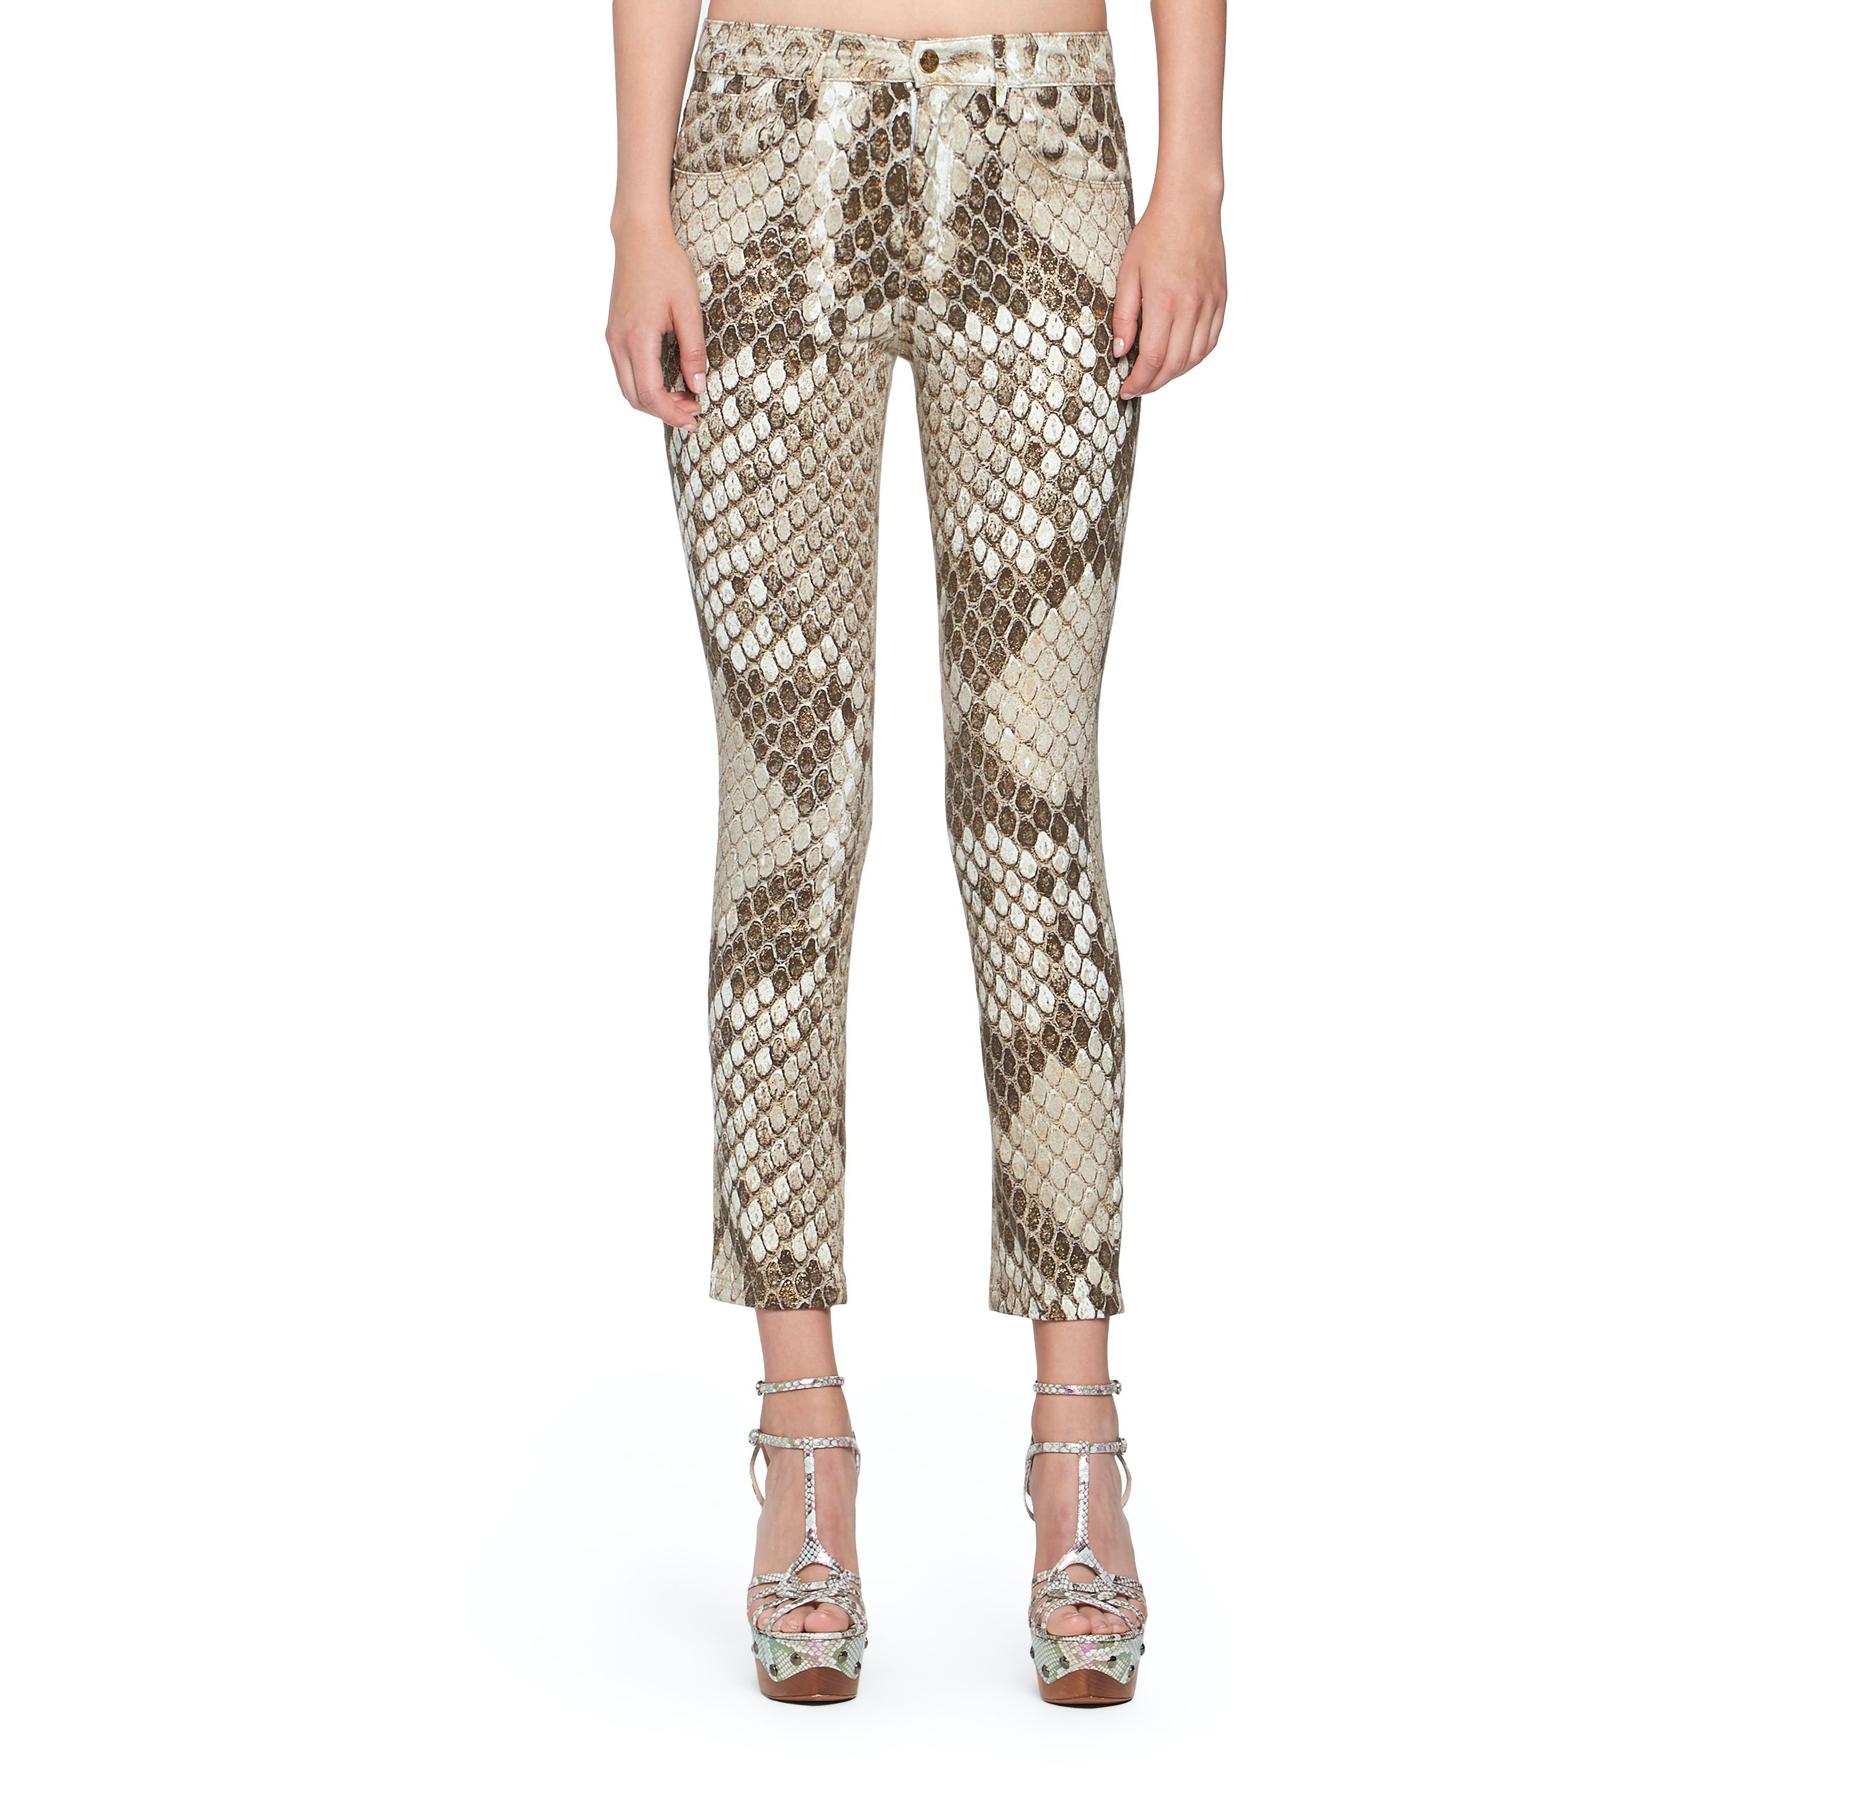 These Roberto Cavalli Serpiente skinny jeans feature a snakeskin print with gold detailing, a skinny flare silhouette, five buttons, and button and zipper closure. Brand new with tags. Made in Italy.

Size: 44 (IT)

Measurements:
Total Length: 41